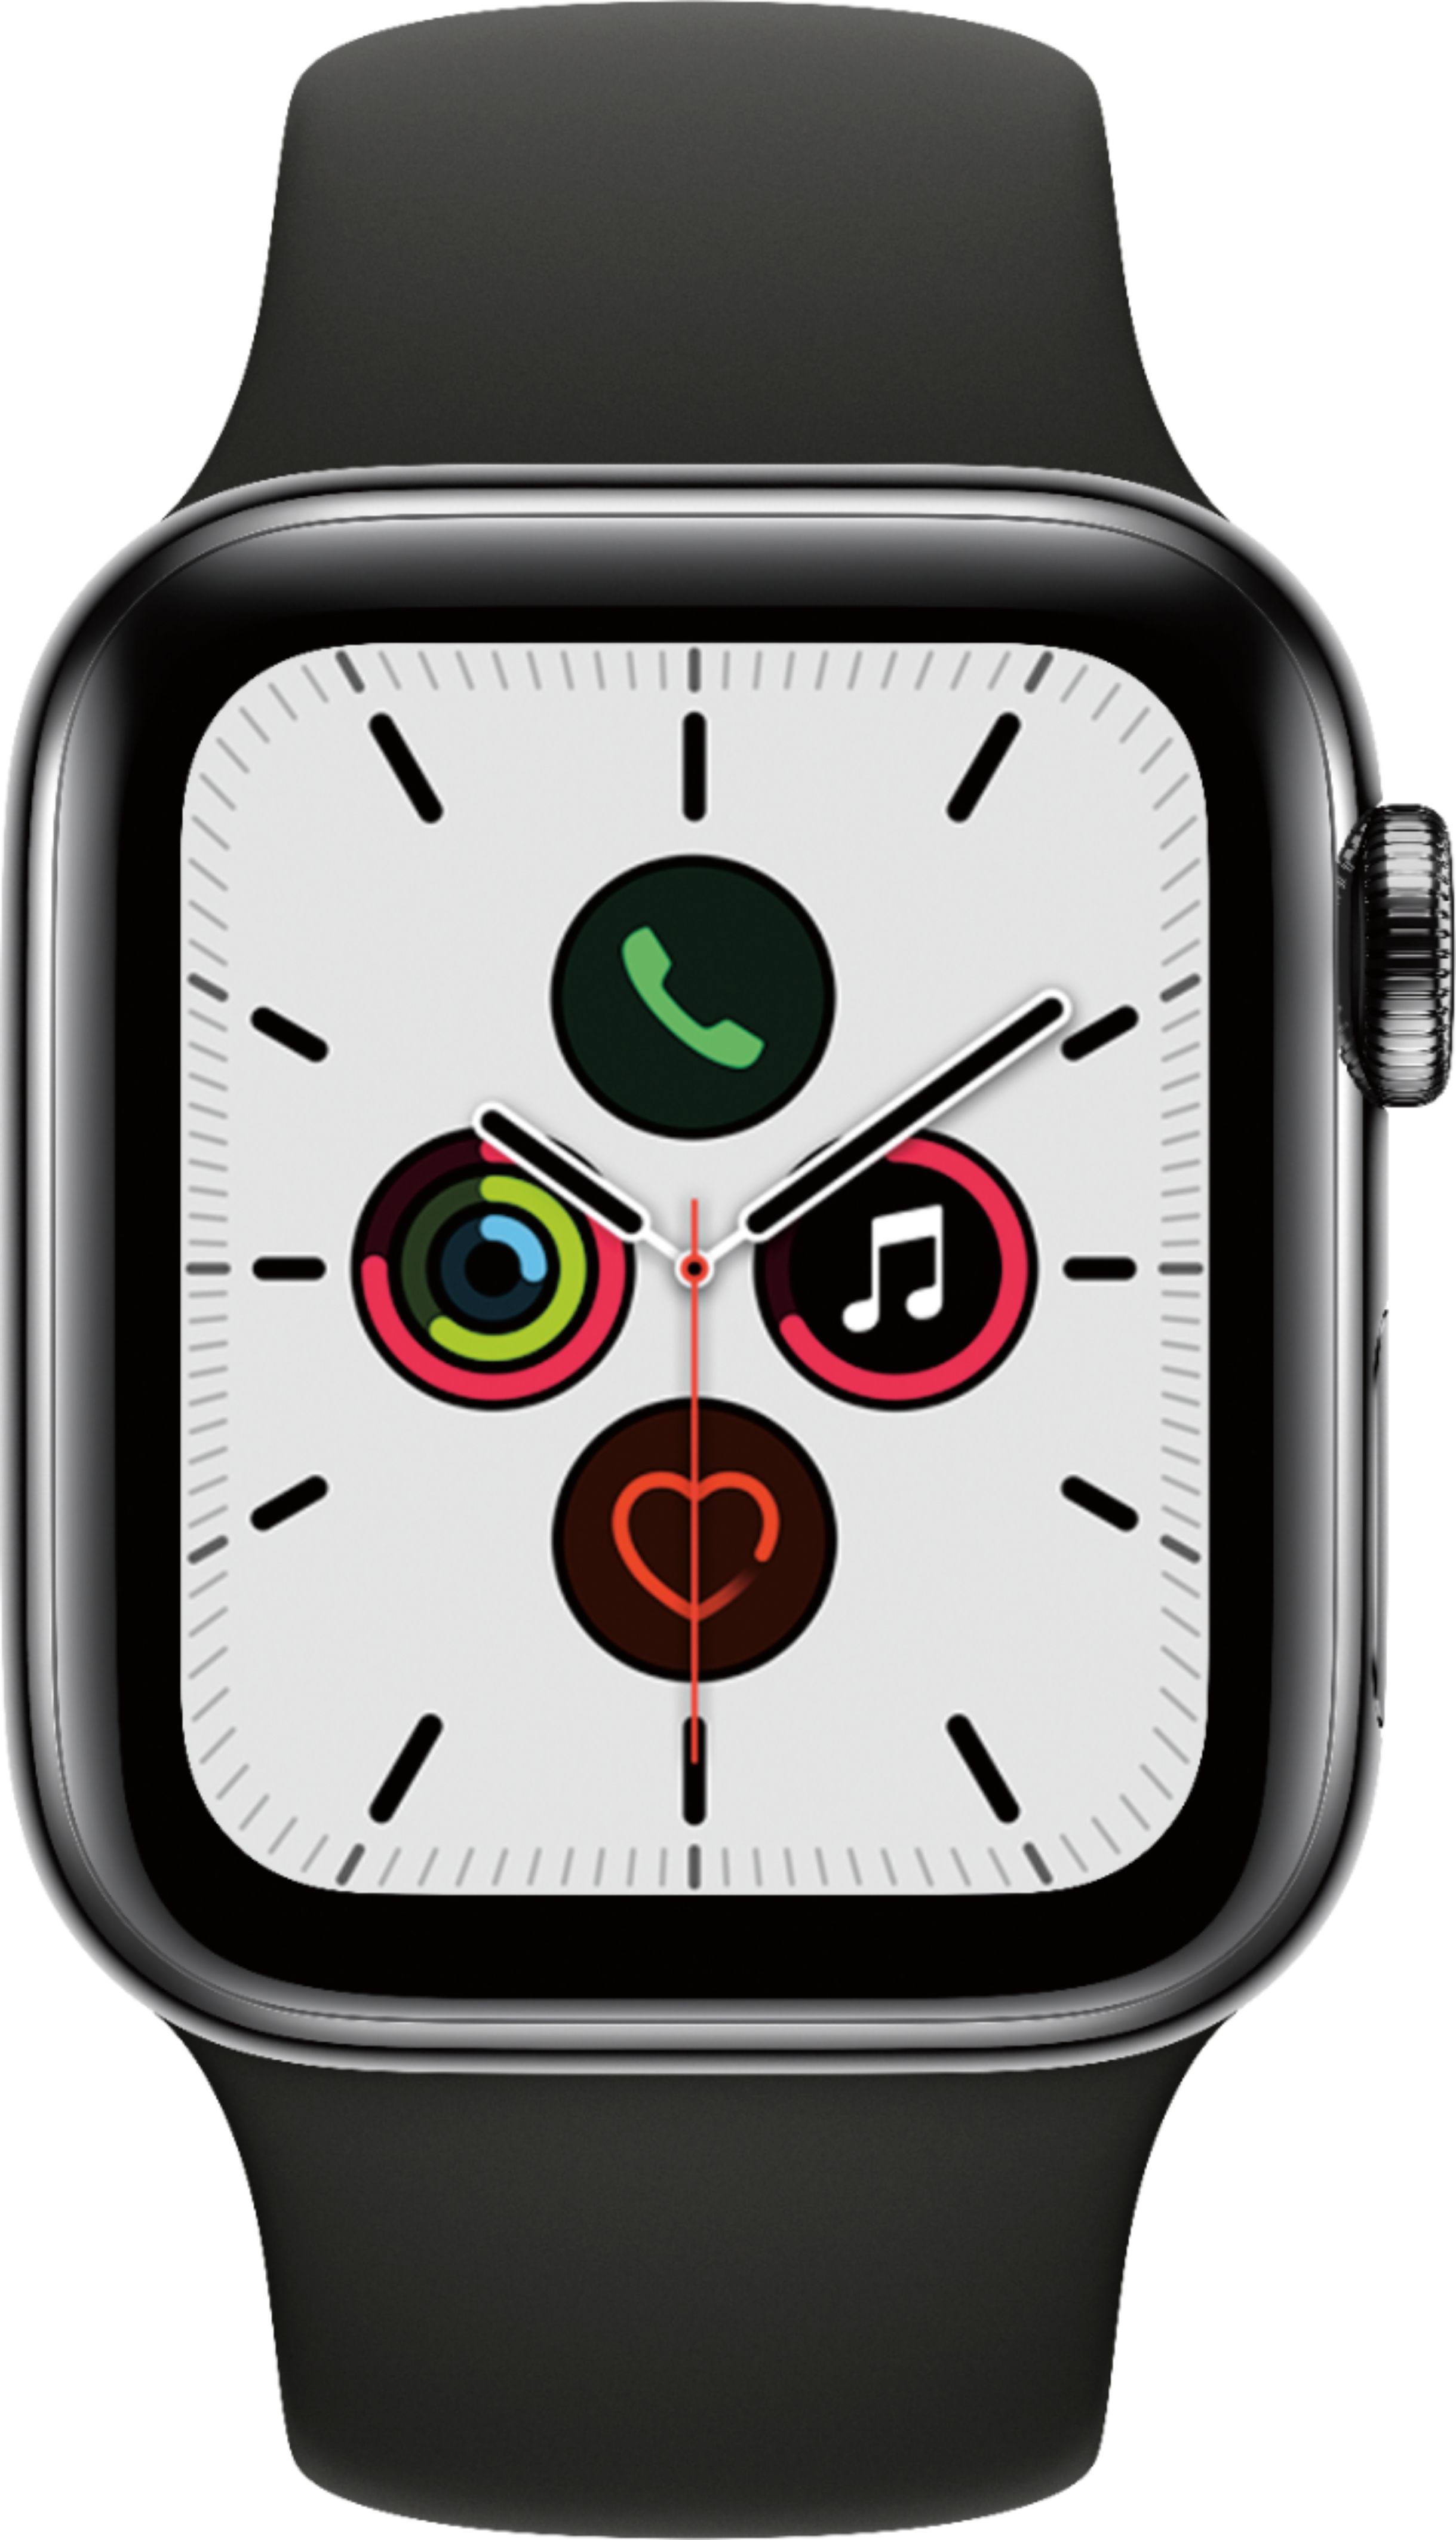 Apple Watch Series 5 (GPS + Cellular) 40mm Stainless Steel Case with Black  Sport Band Space Black Stainless Steel MWWW2LL/A - Best Buy